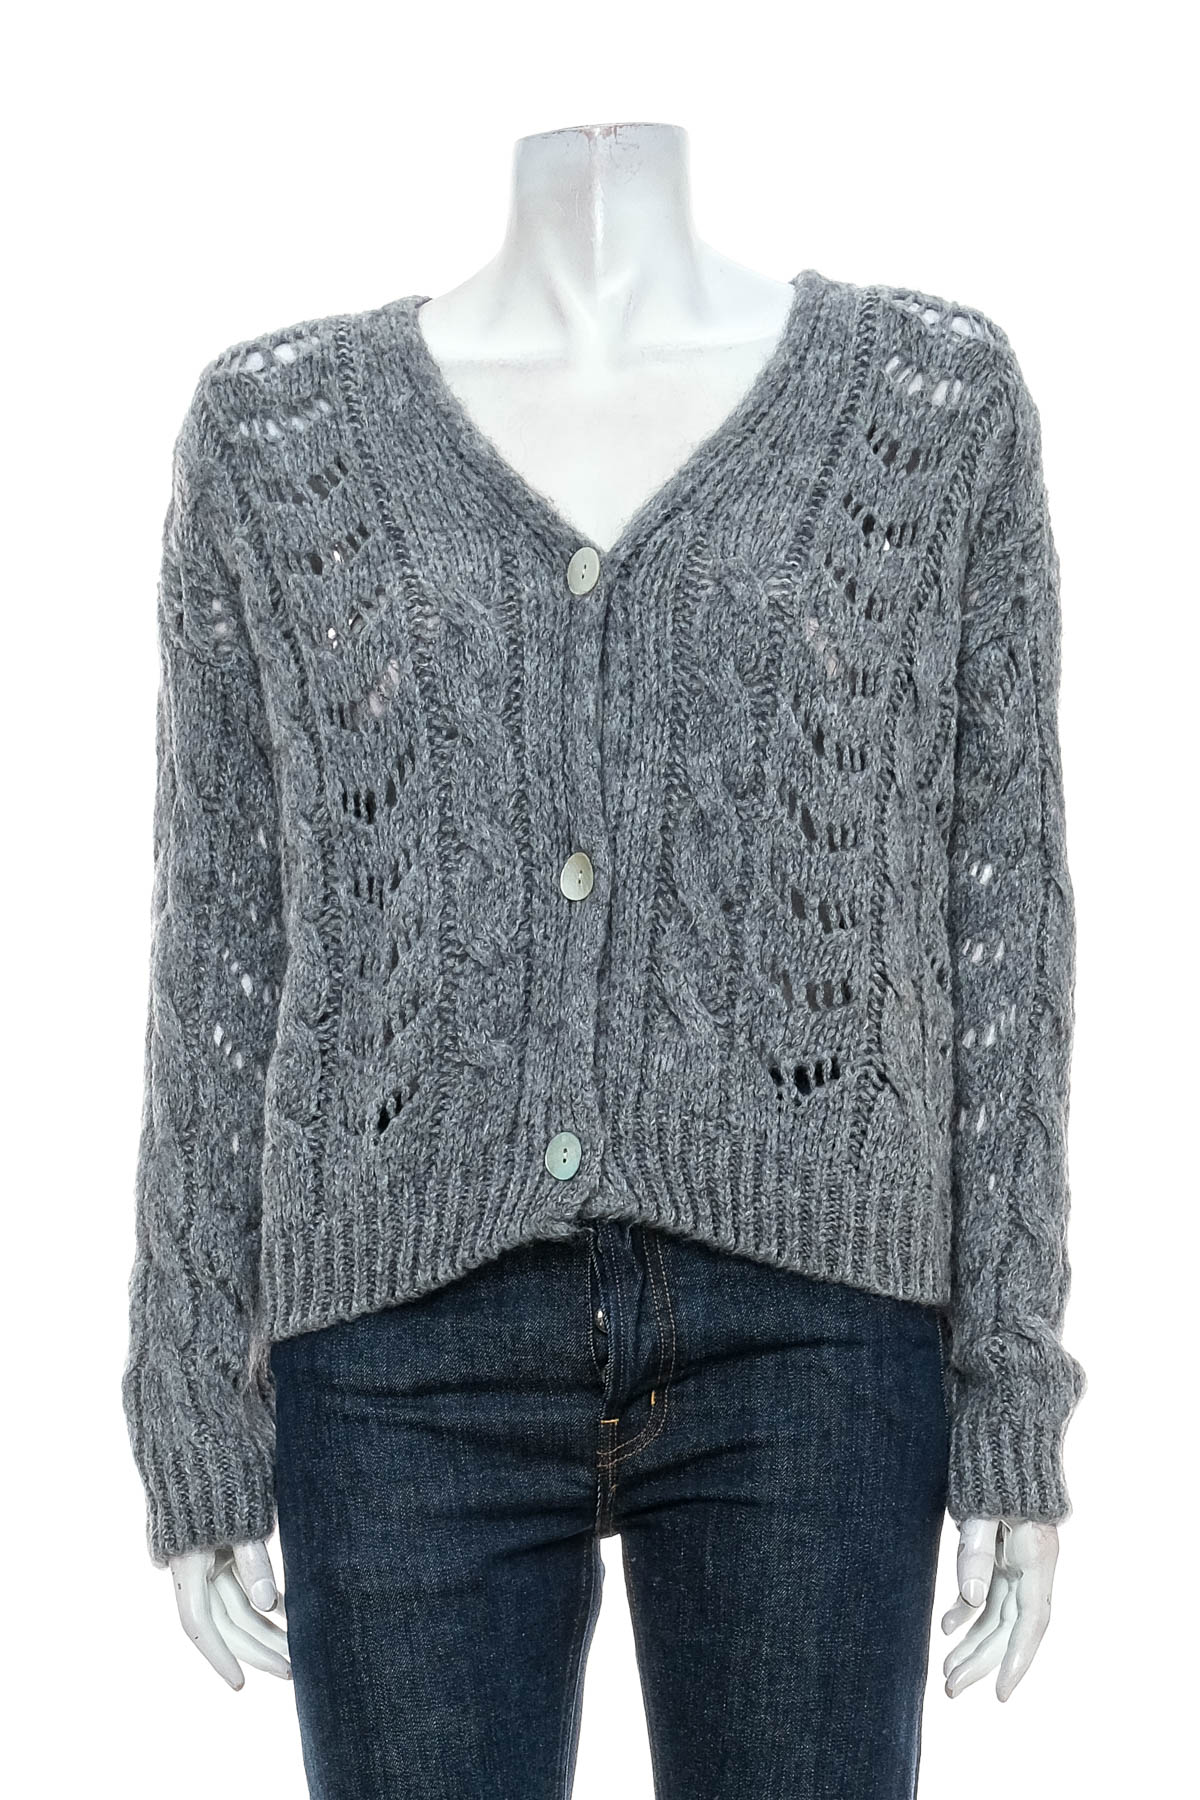 Women's cardigan - Monday Afternoon - 0